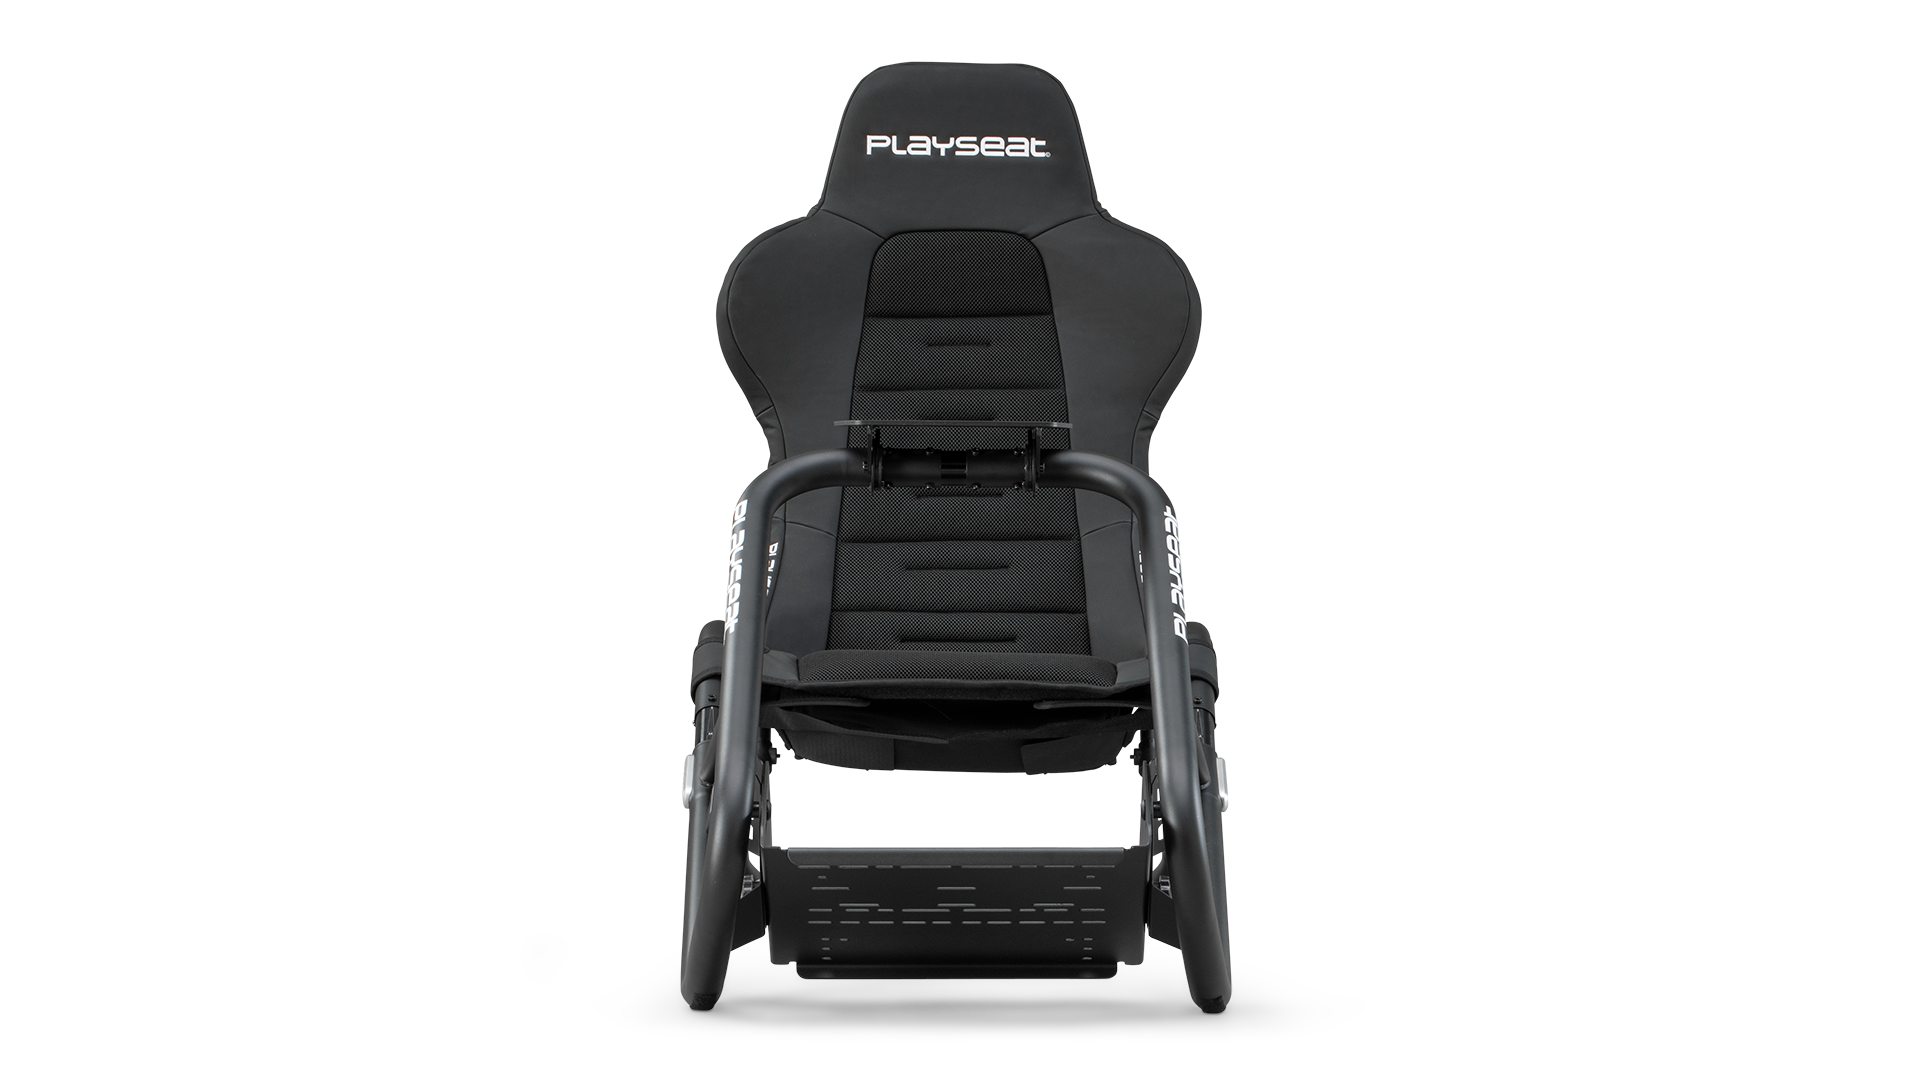 playseat-trophy-black-direct-drive-simulator-front-view-1920x1080-5.png